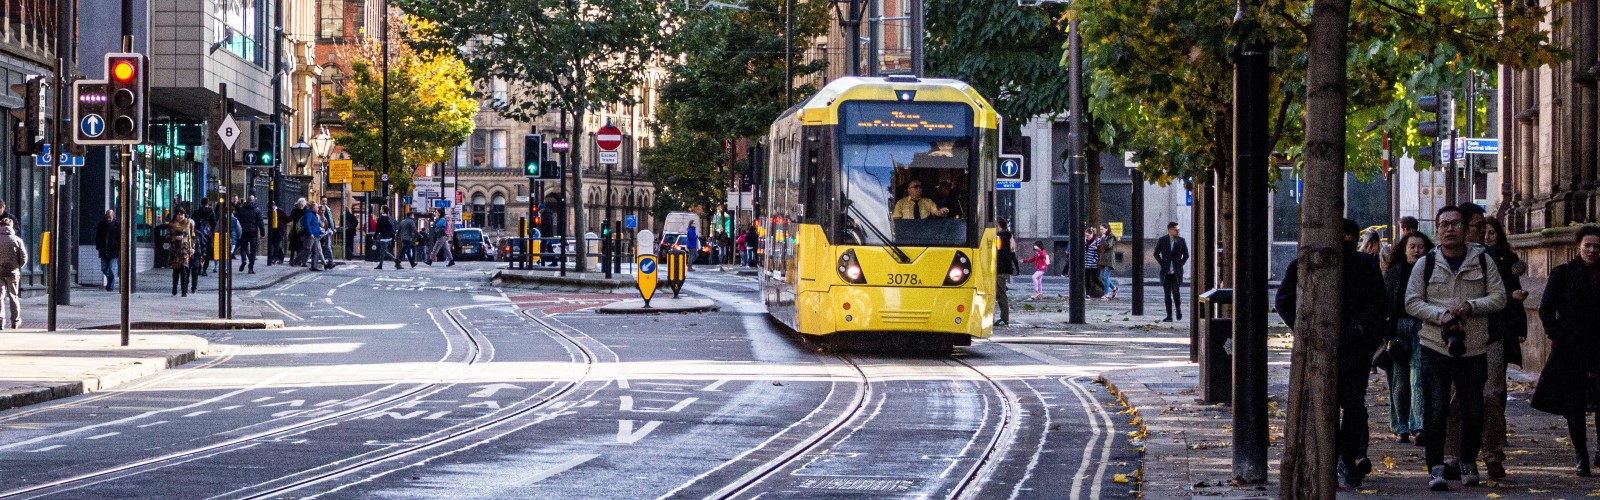 Photo of a yellow tram coming towards the camera on the tram line with people walking on the sidepaths